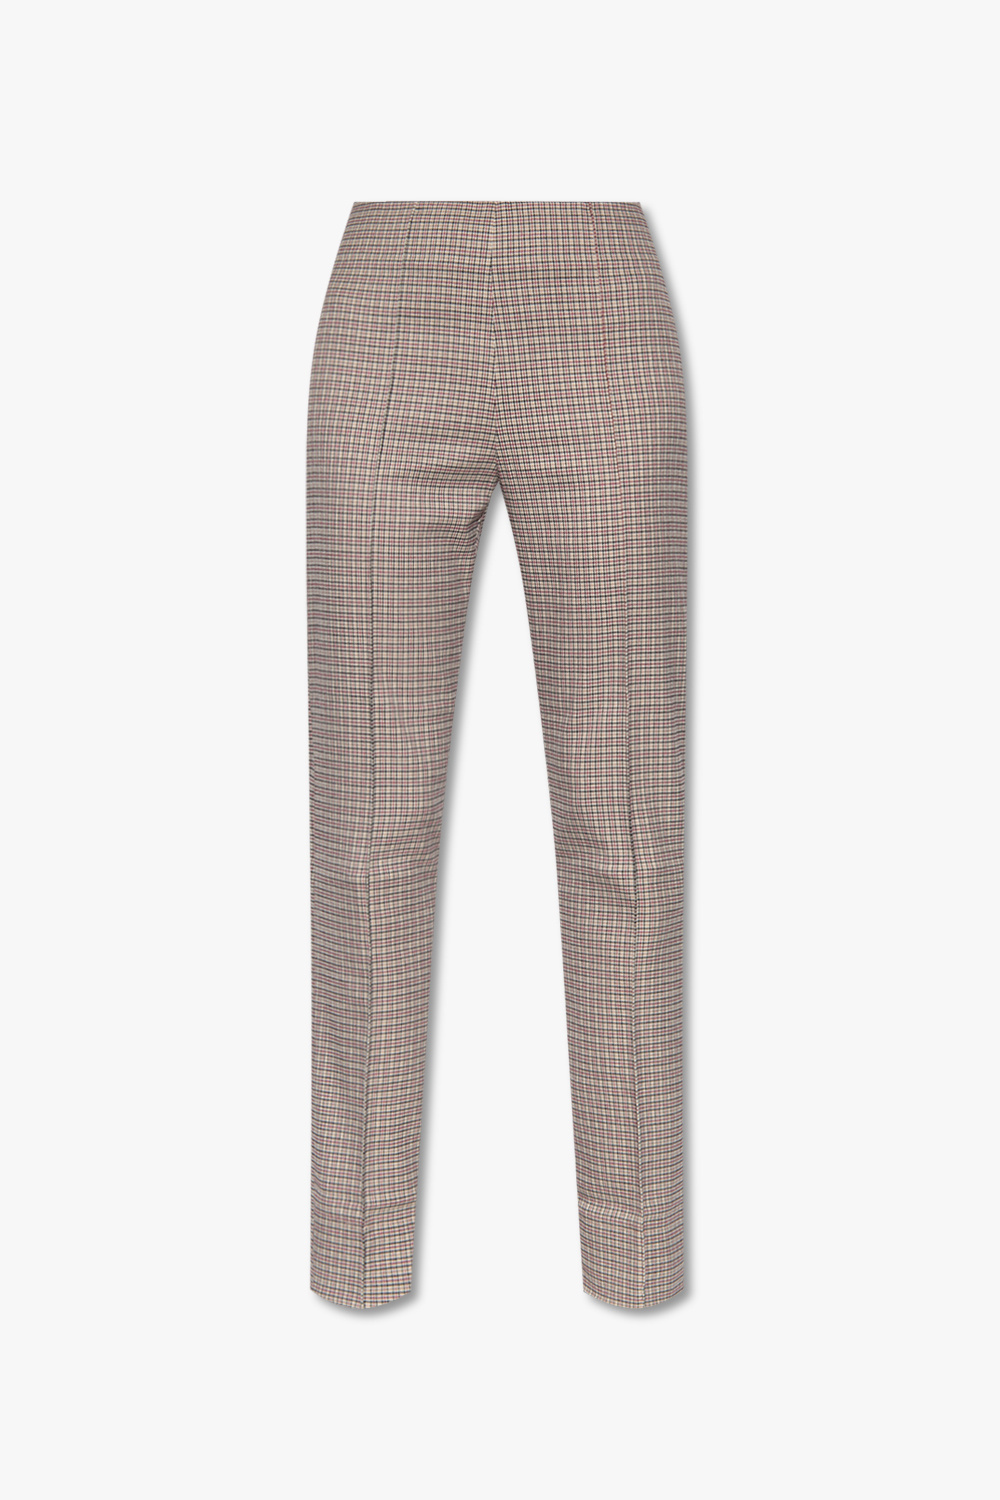 Notes Du Nord ‘Emia’ pleat-front trousers